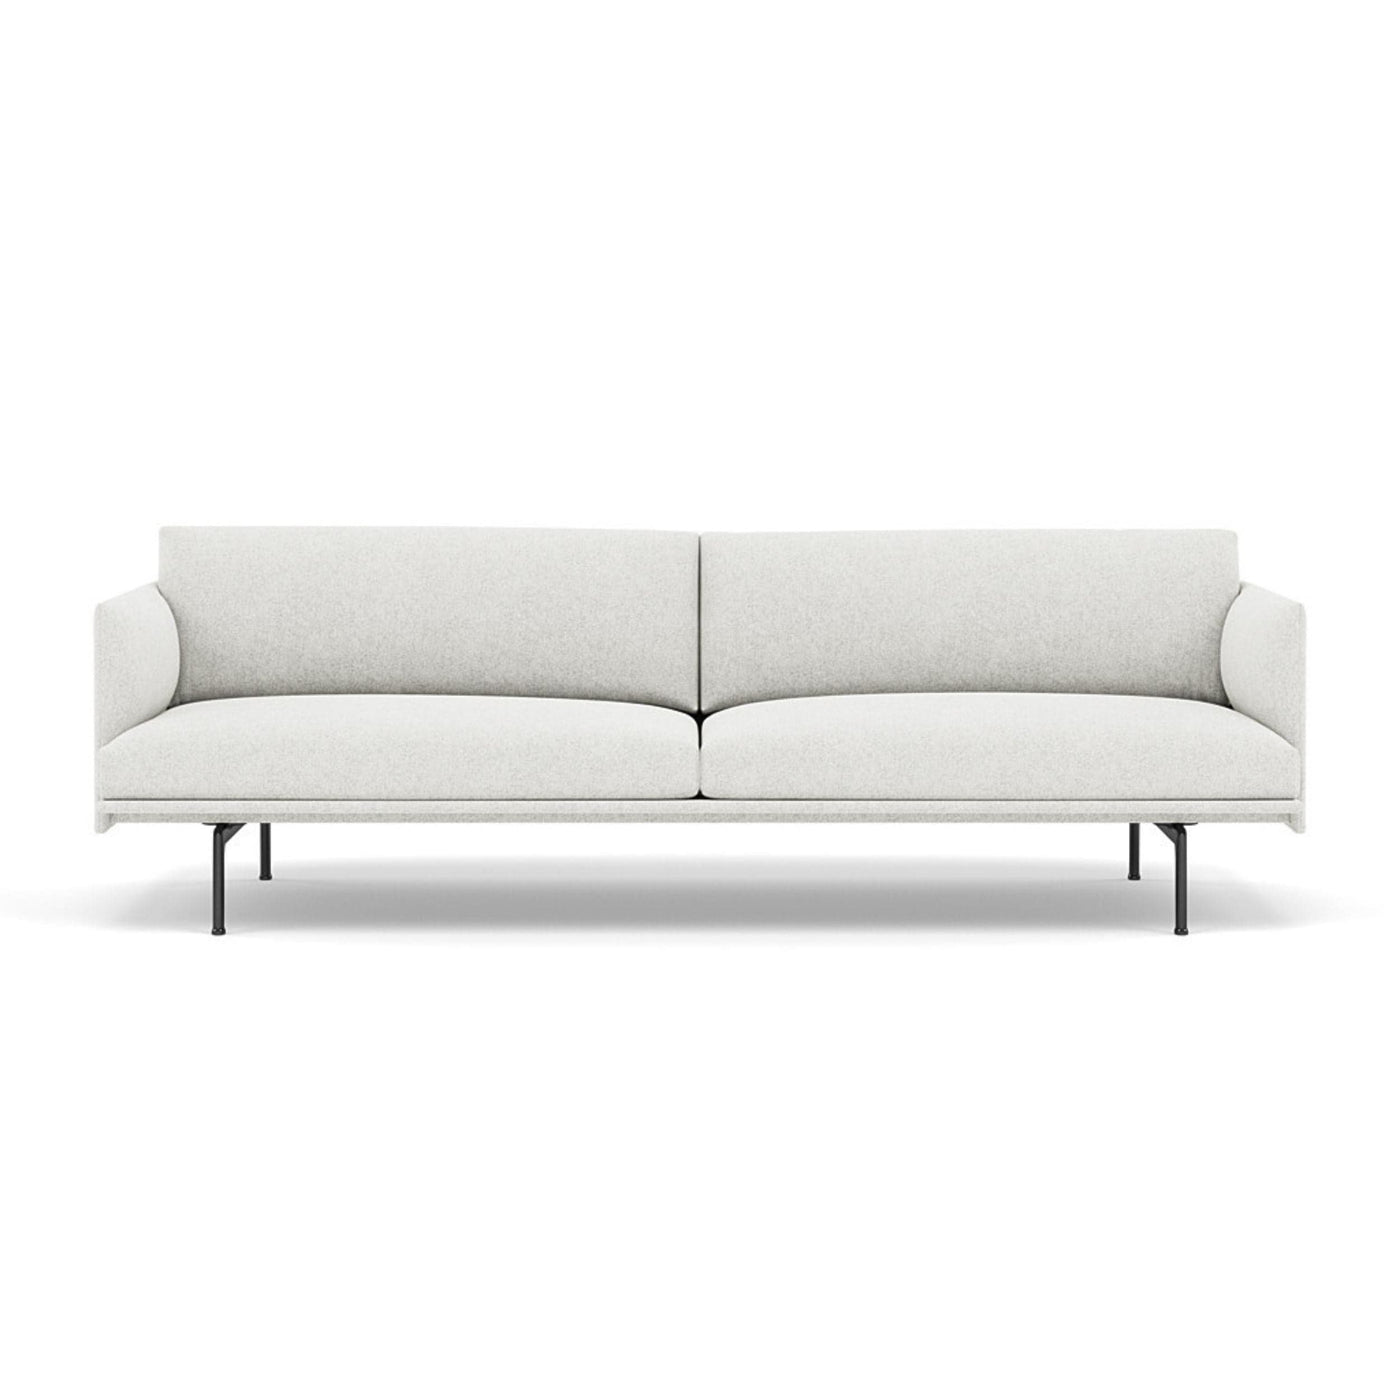 Muuto Outline  Studio Sofa 220 in hallingdal 110 and black legs. Made to order from someday designs. #colour_hallingdal-110